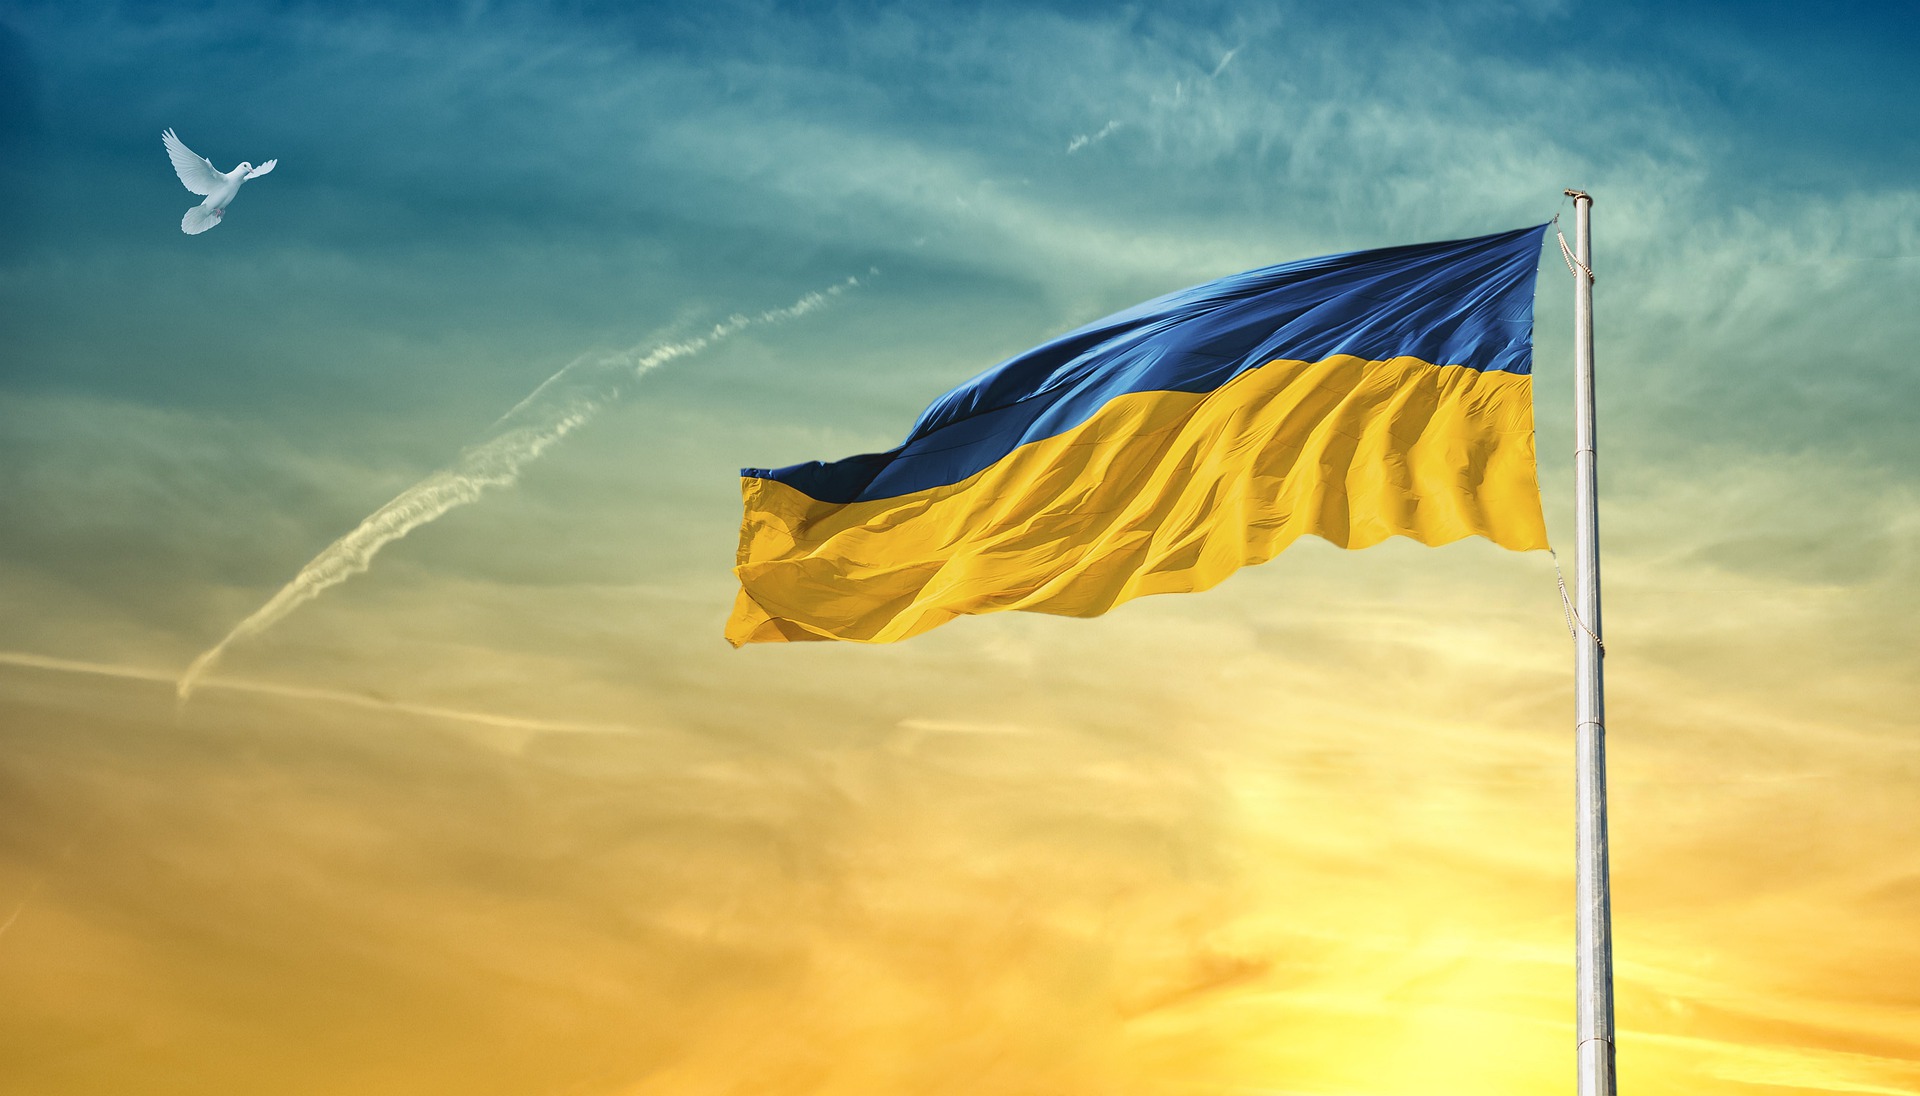 A photo of the flying Ukrainian flag and a white dove